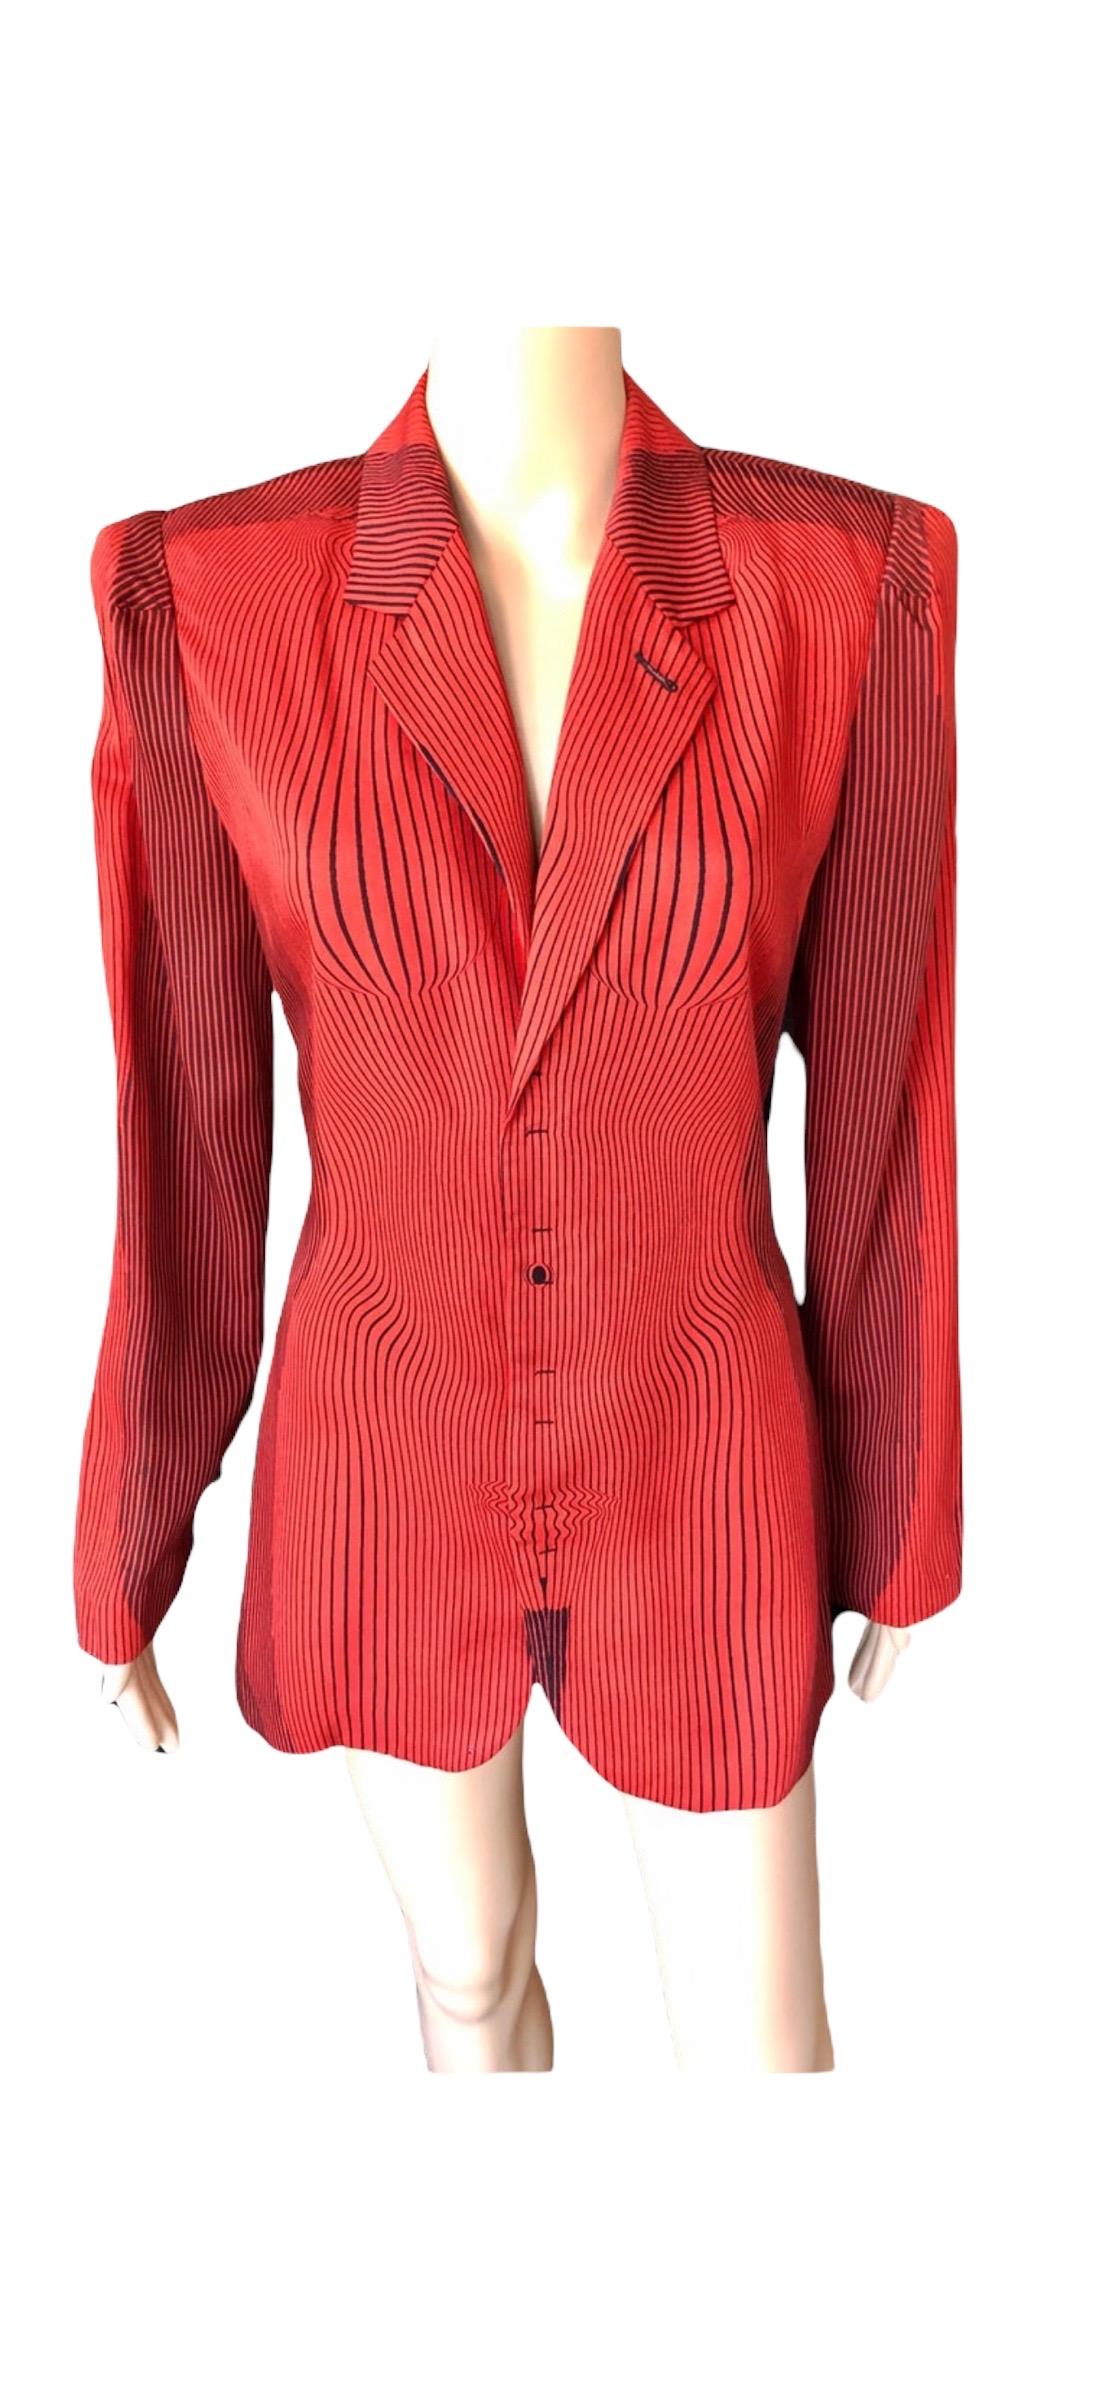 Jean Paul Gaultier S/S 1996 Vintage Cyberbaba Optical Illusion Jacket Blazer Top For Sale 12